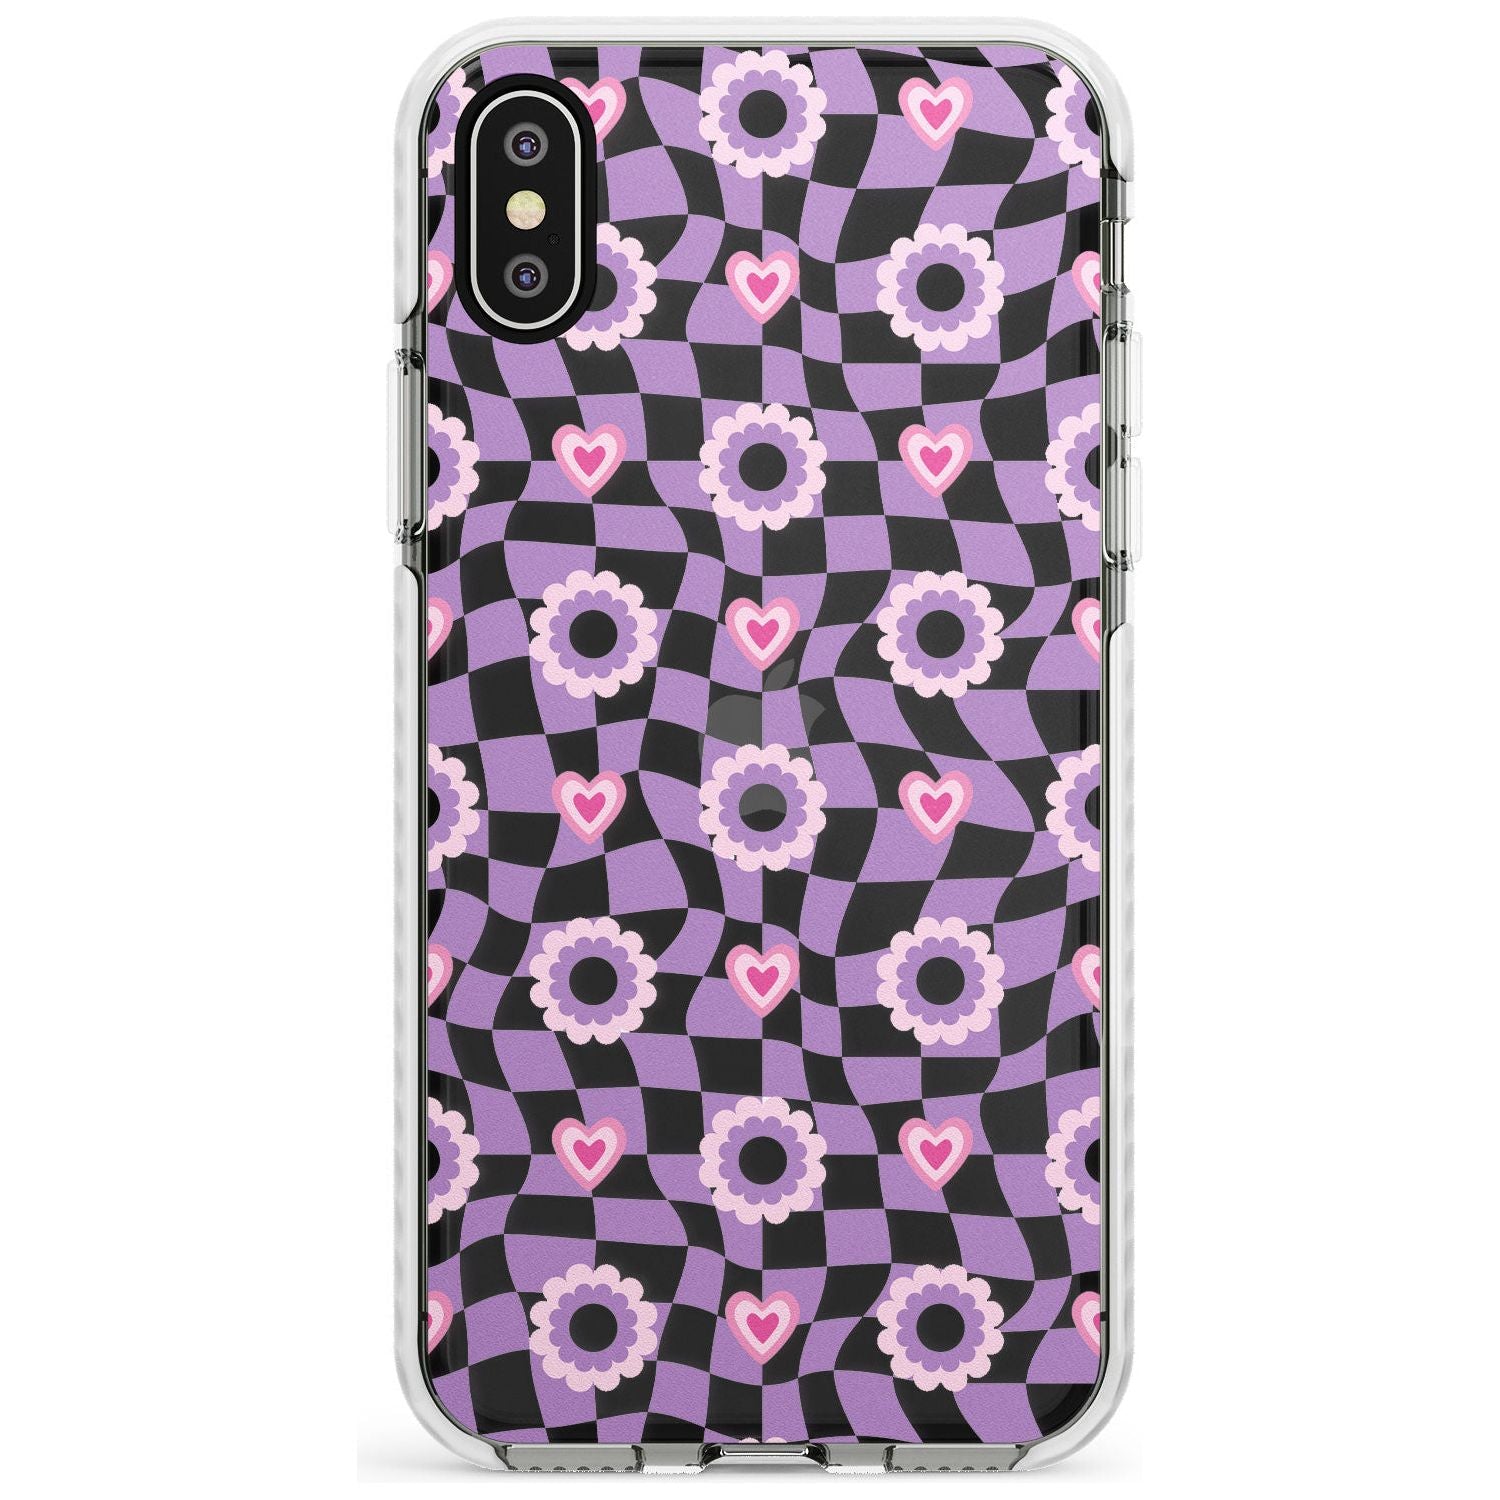 Checkered Love Pattern Impact Phone Case for iPhone X XS Max XR